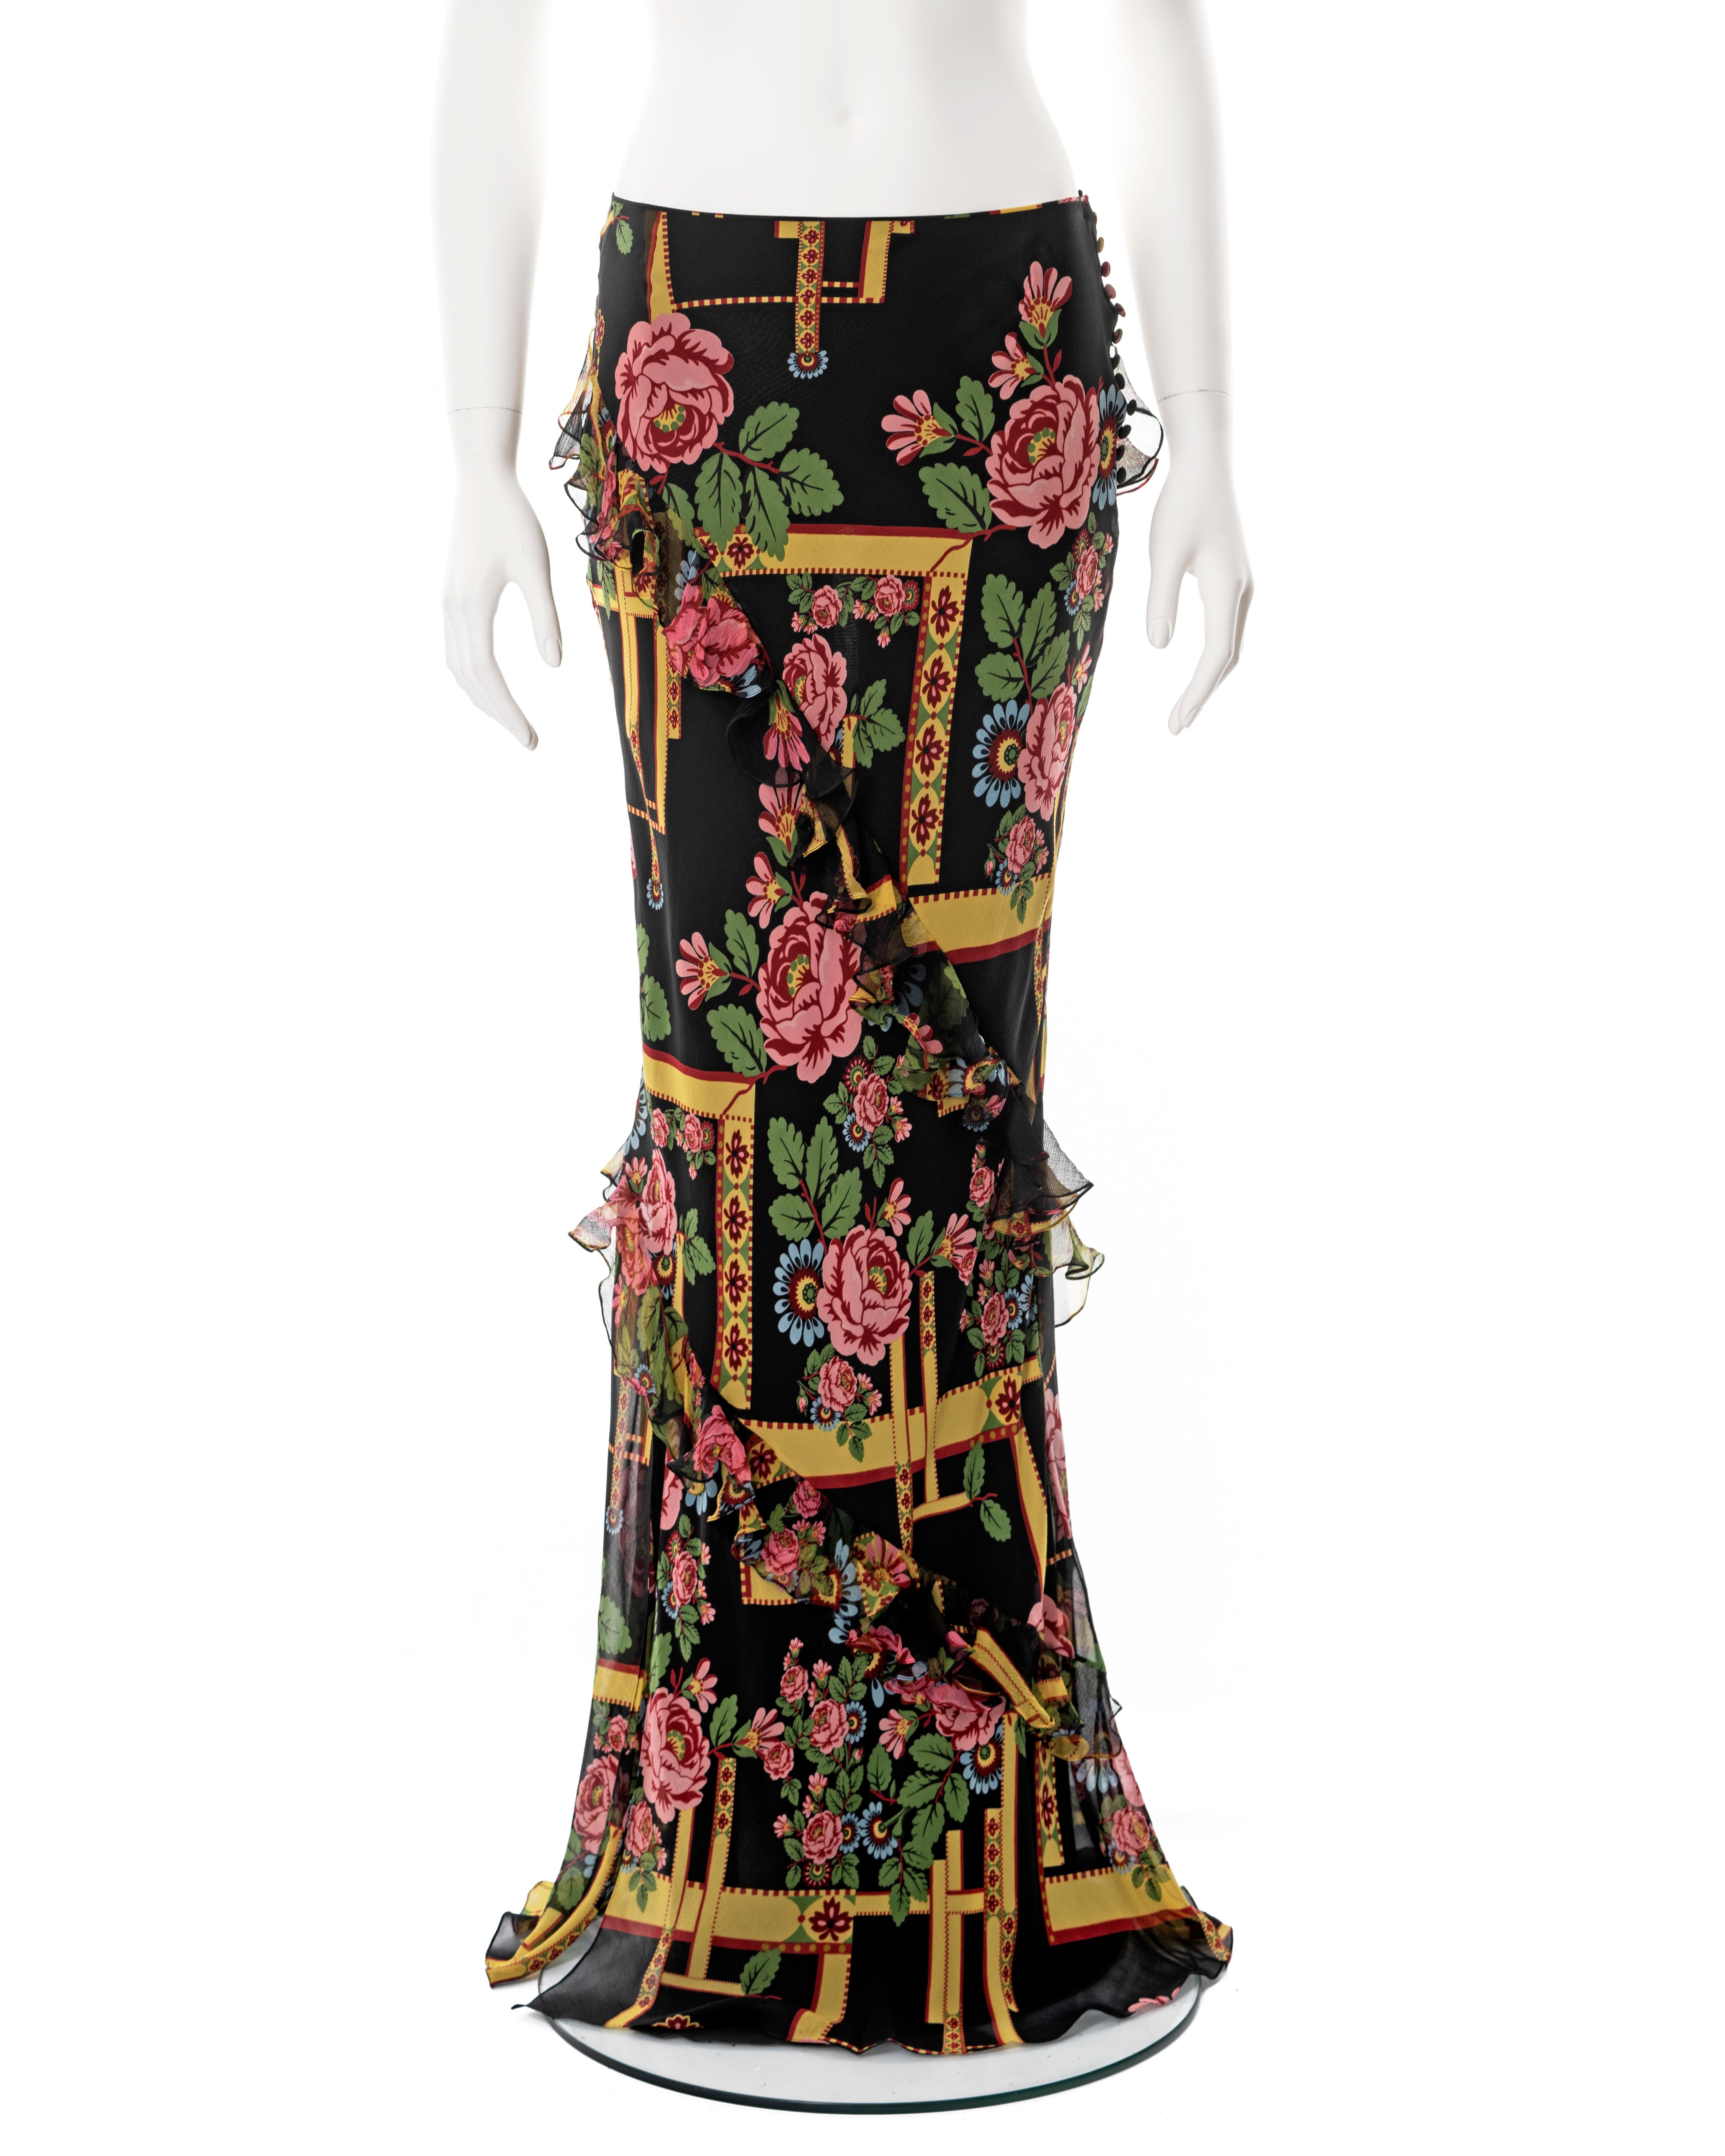 ▪ John Galliano bias-cut silk maxi skirt
▪ Sold by One of a Kind Archive
▪ Fall-Winter 2004
▪ Constructed from a floral printed silk with black base with pink, yellow and green motif 
▪ Silk chiffon frill trim outline bias-cut panels
▪ Multiple